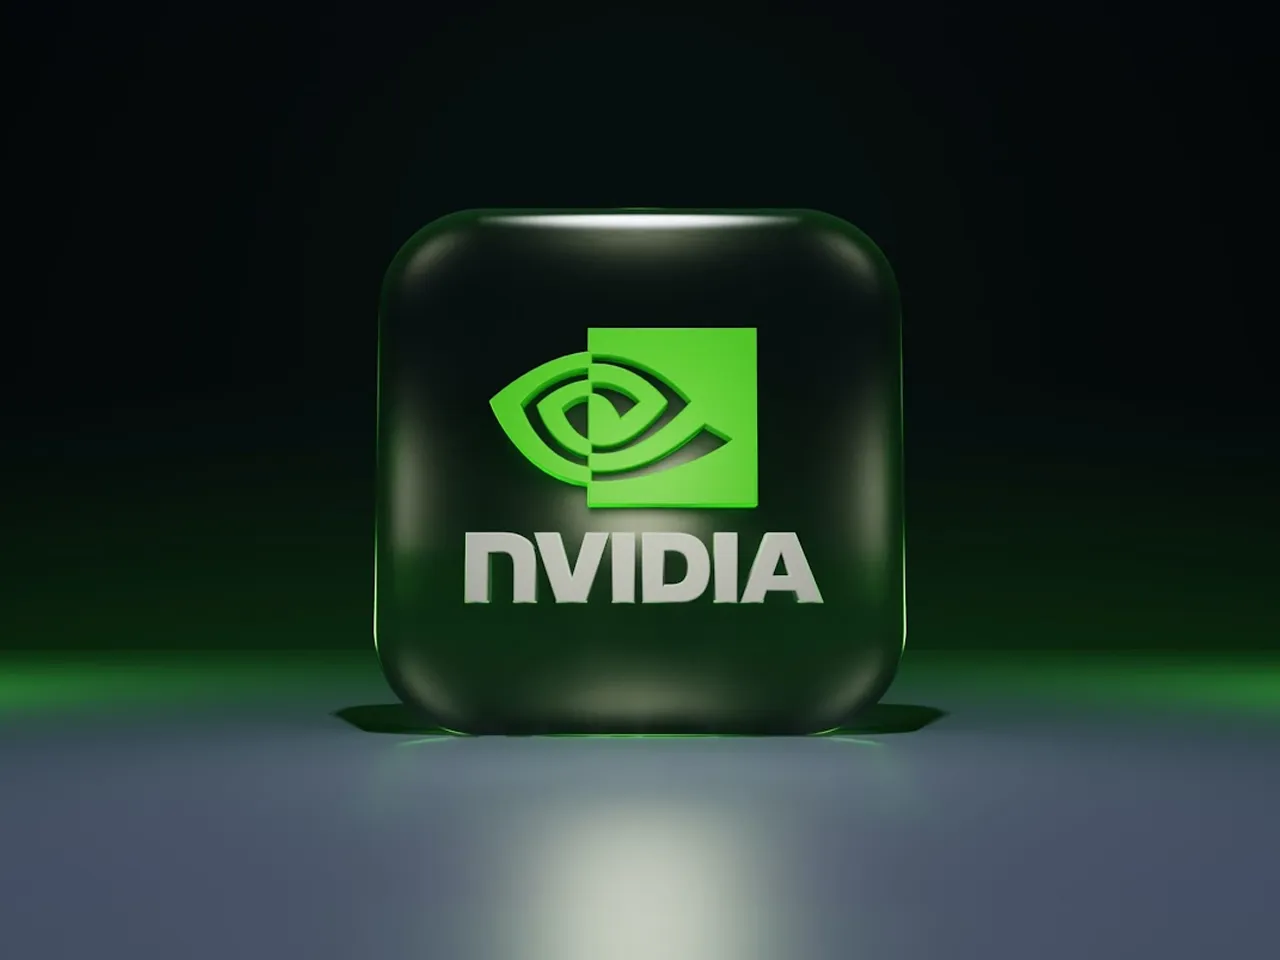 A day after surpassing Amazon, Nvidia is now worth more than Alphabet